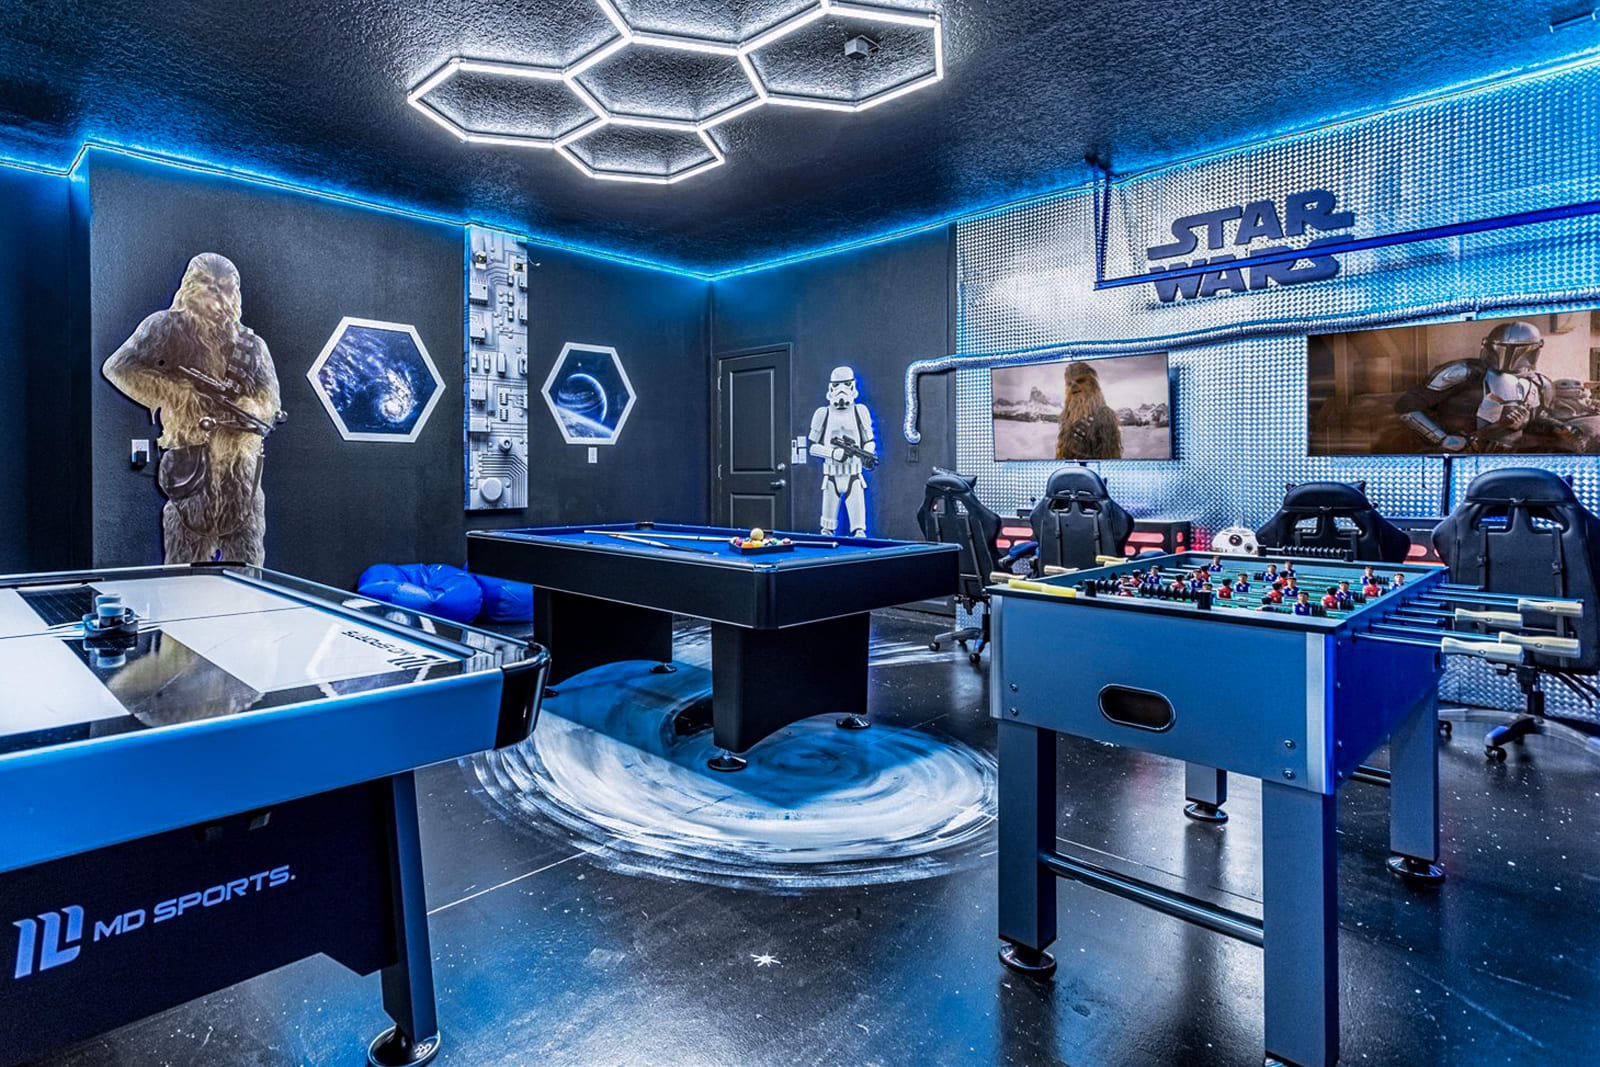 Awesome Games Room Cinema Theme Rooms and More Photo